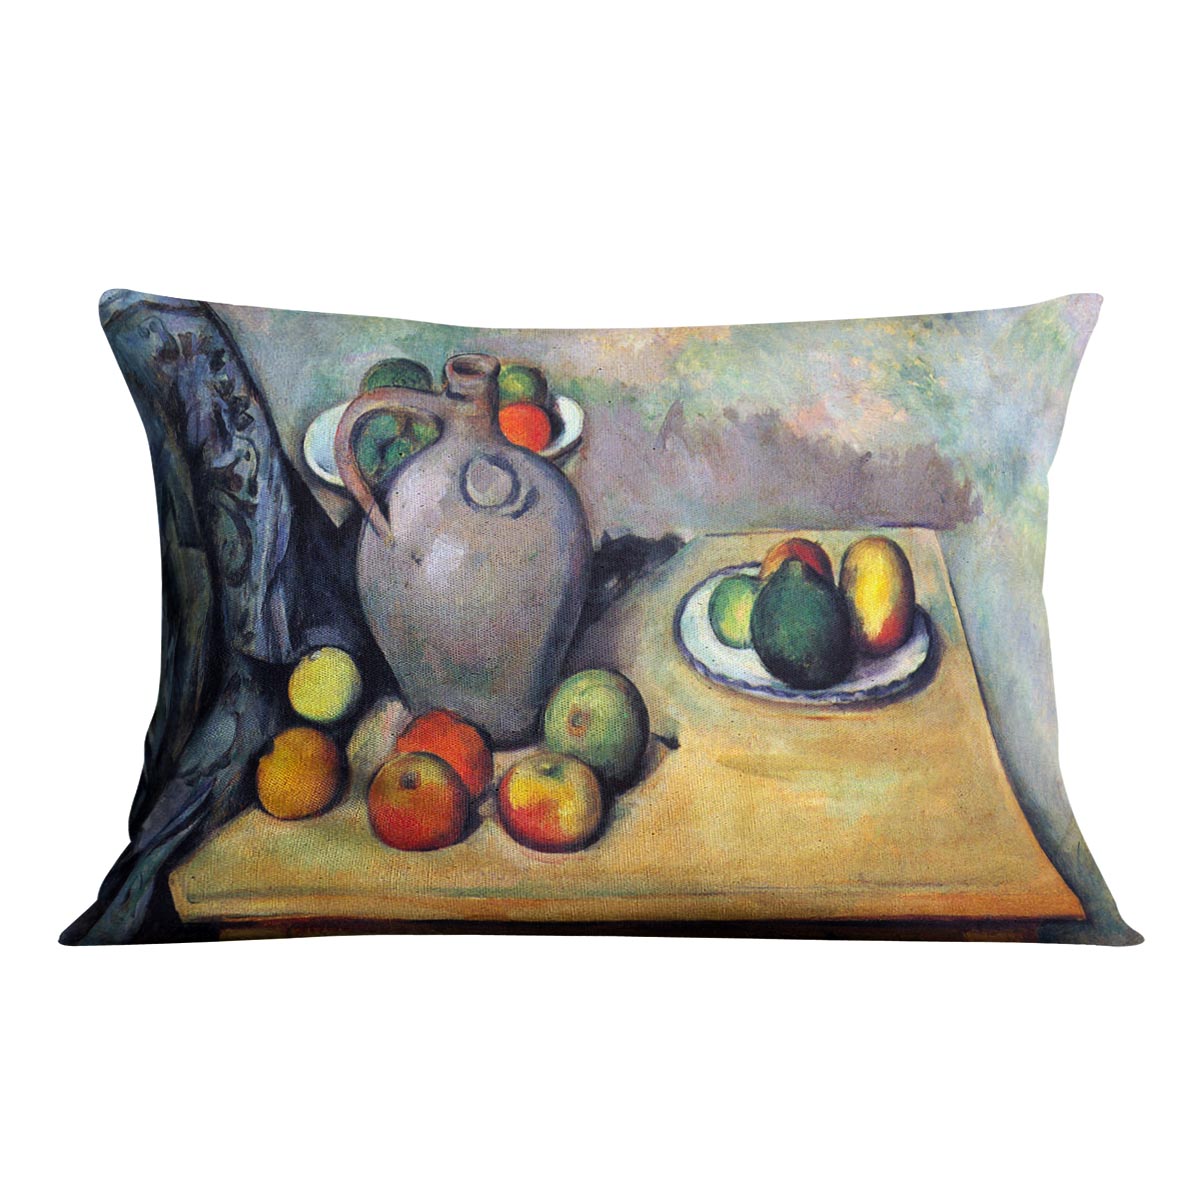 Still life pitcher and fruit on a table by Cezanne Cushion